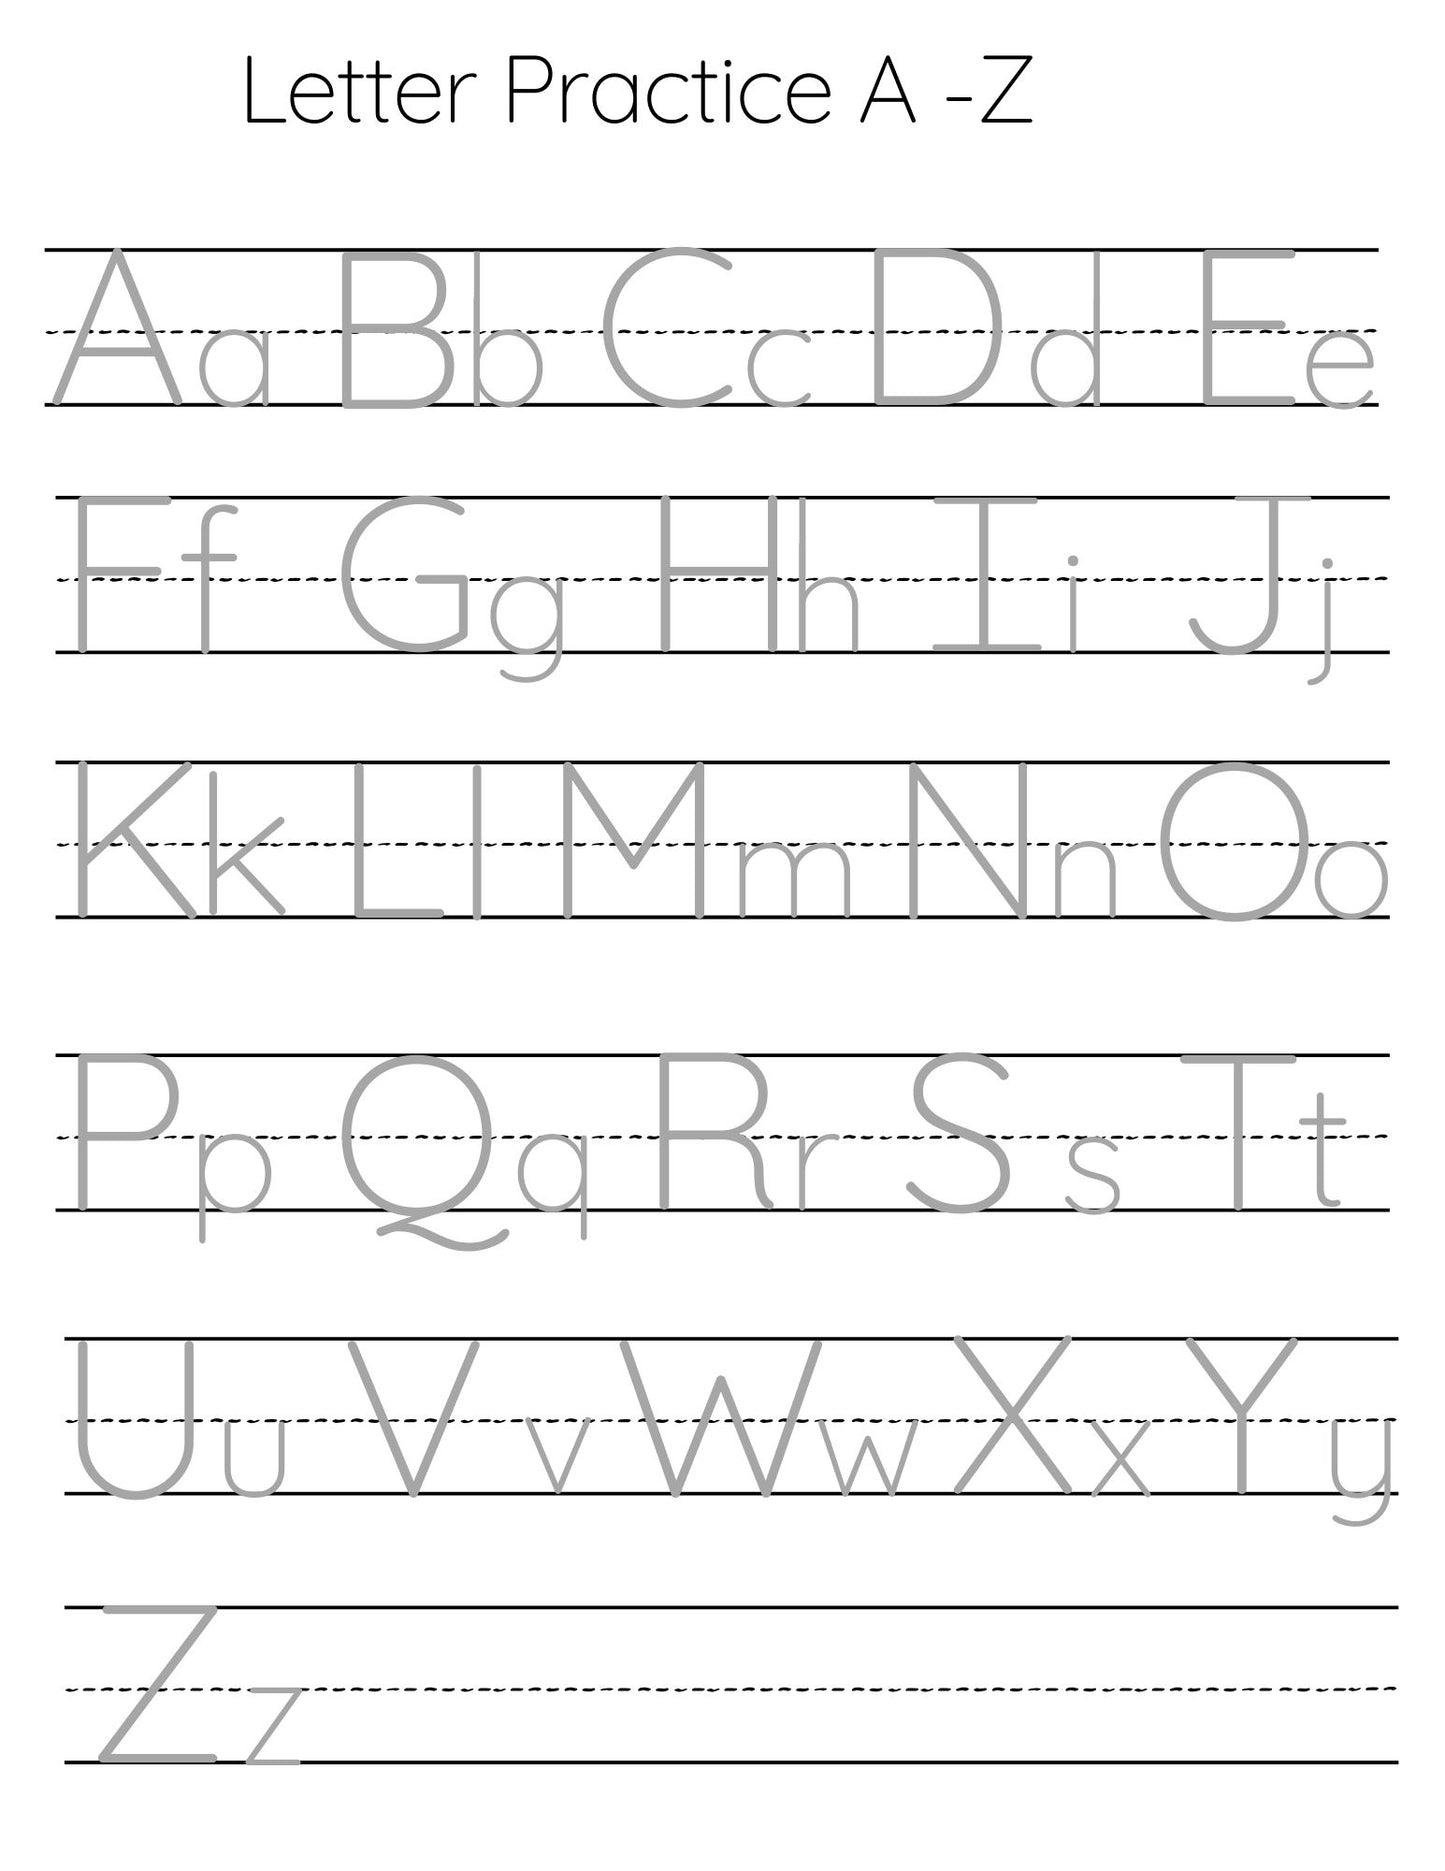 Letter Tracing Sheet for Alphabet Letters A-Z